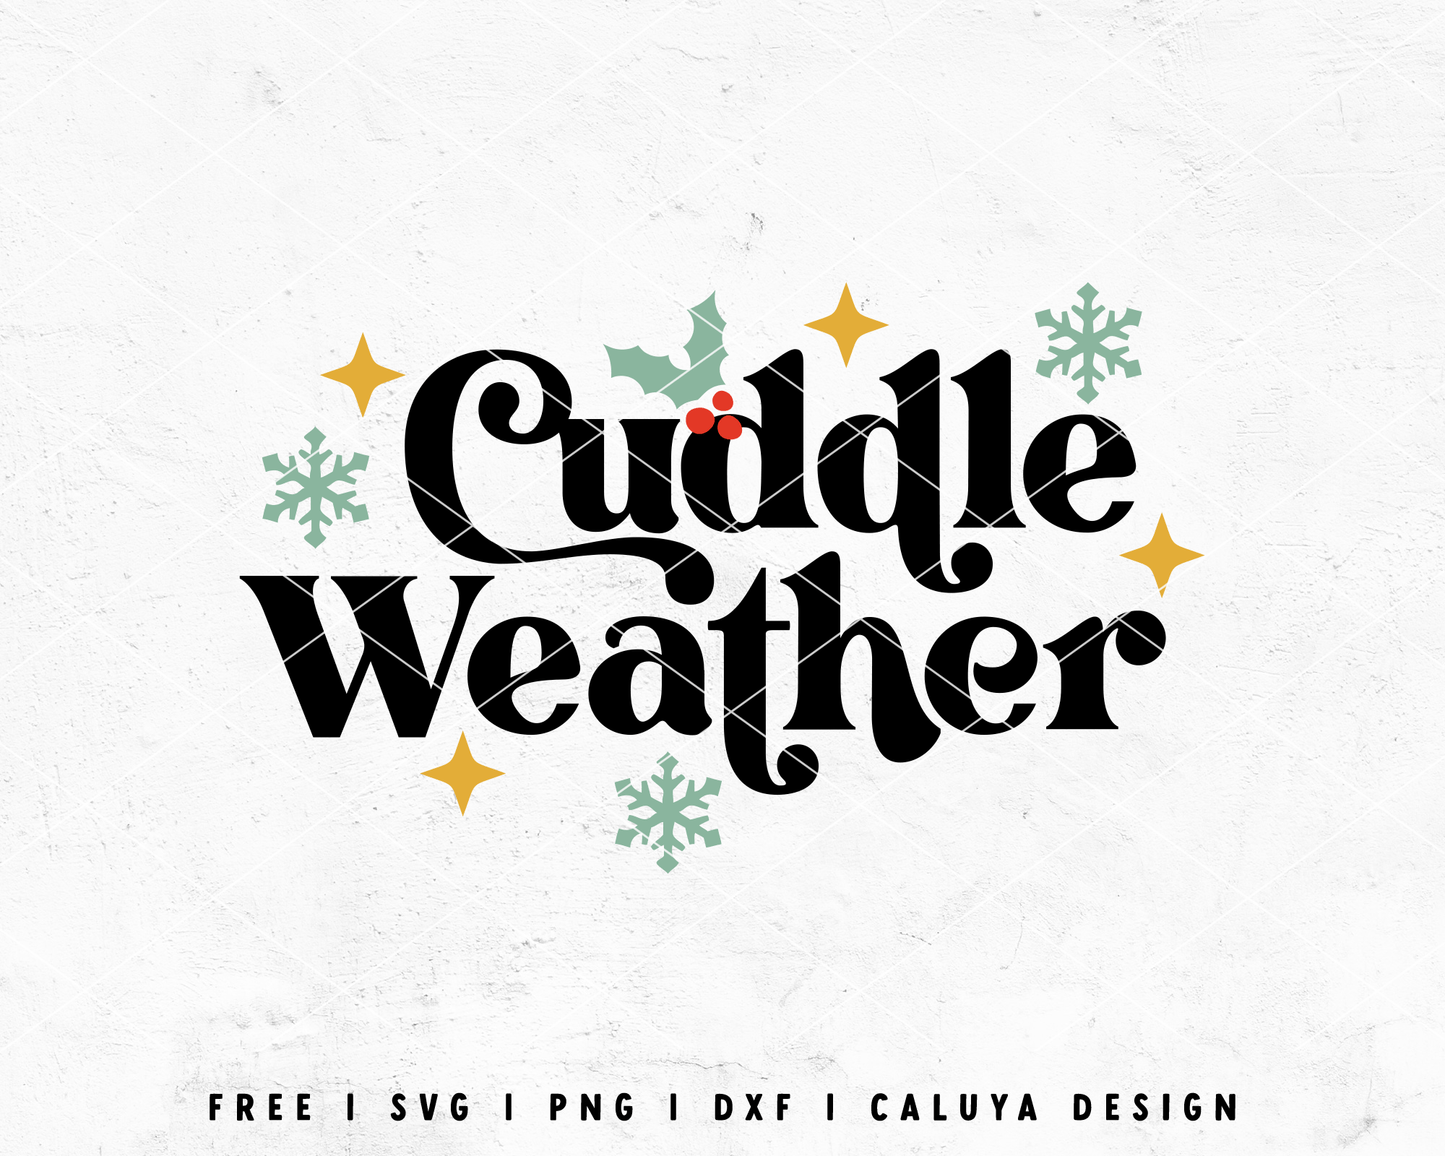 FREE Cuddle Weather SVG | Christmas Quote SVG Cut File for Cricut, Cameo Silhouette | Free SVG Cut File